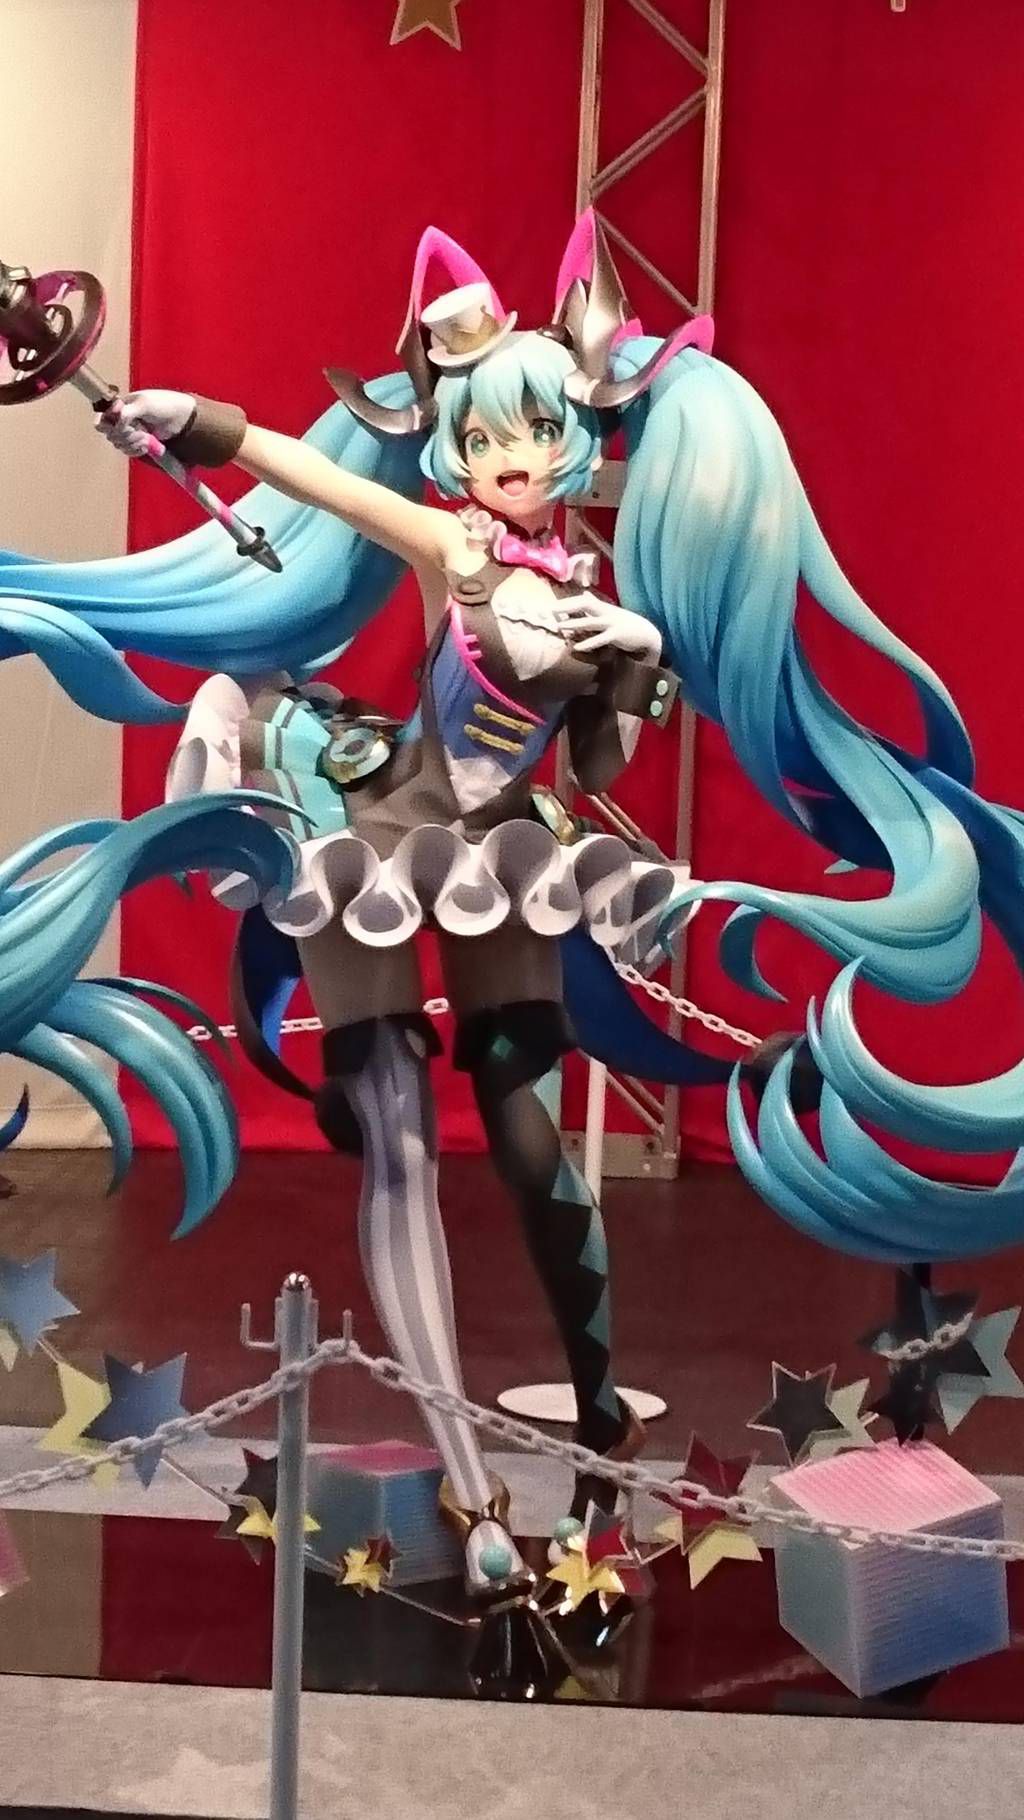 Vocaloid Image that is becoming the Iki face of Hatsune Miku 11